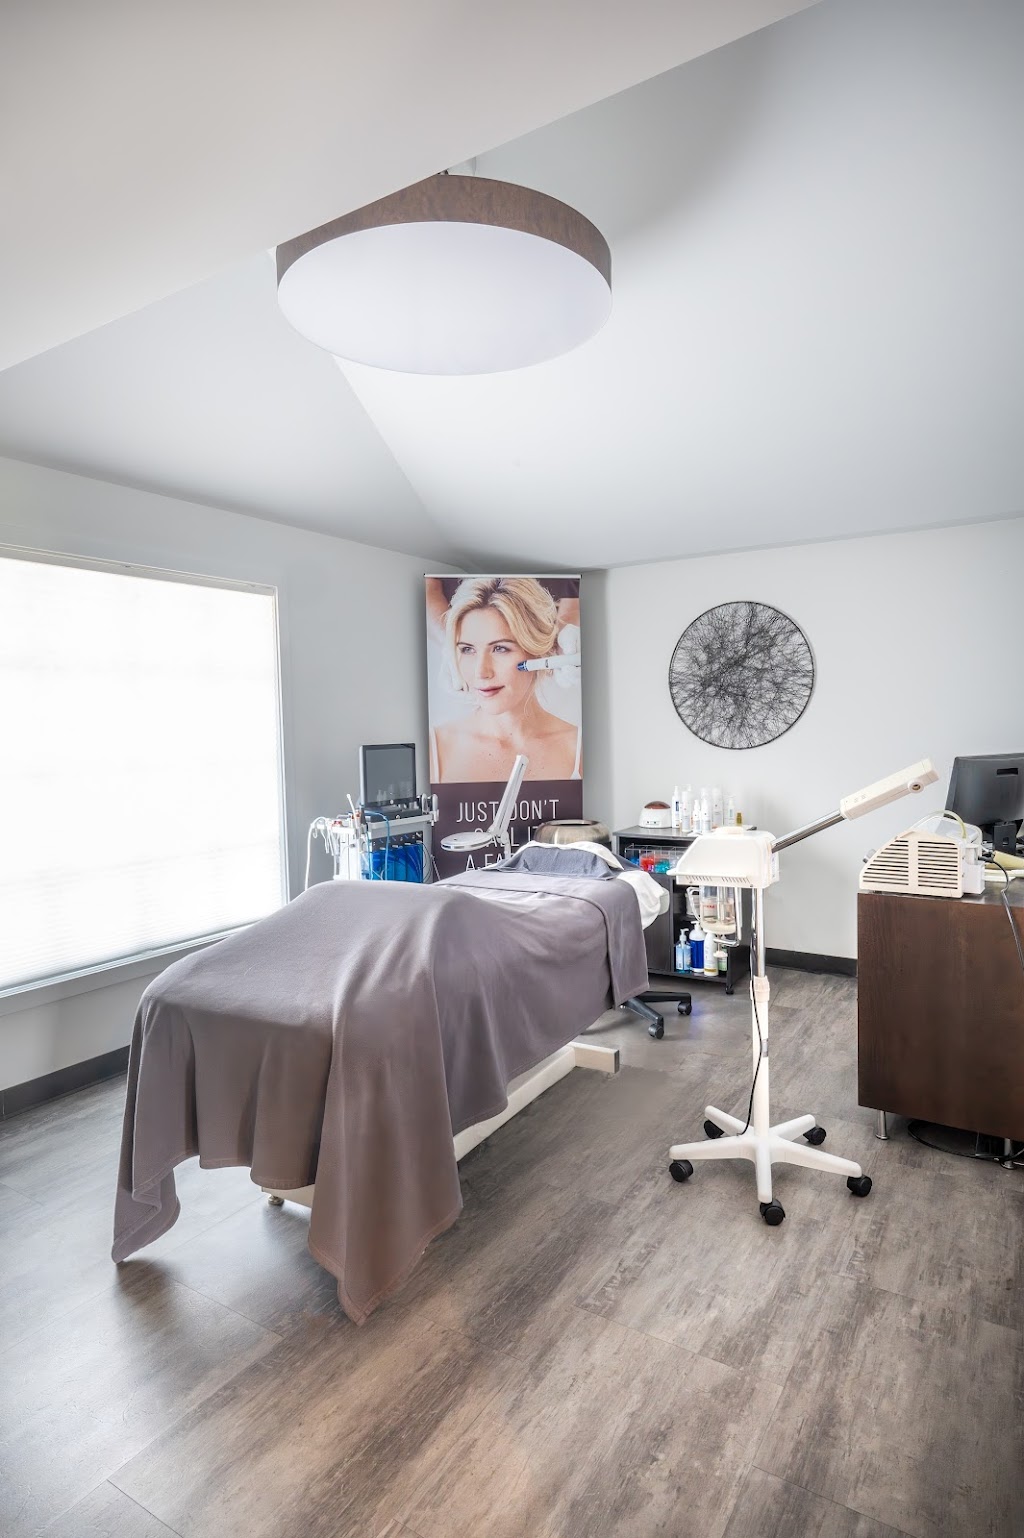 Esana Plastic Surgery & MedSpa in Guilford | 10 Long Hill Rd, Guilford, CT 06437 | Phone: (203) 453-2323